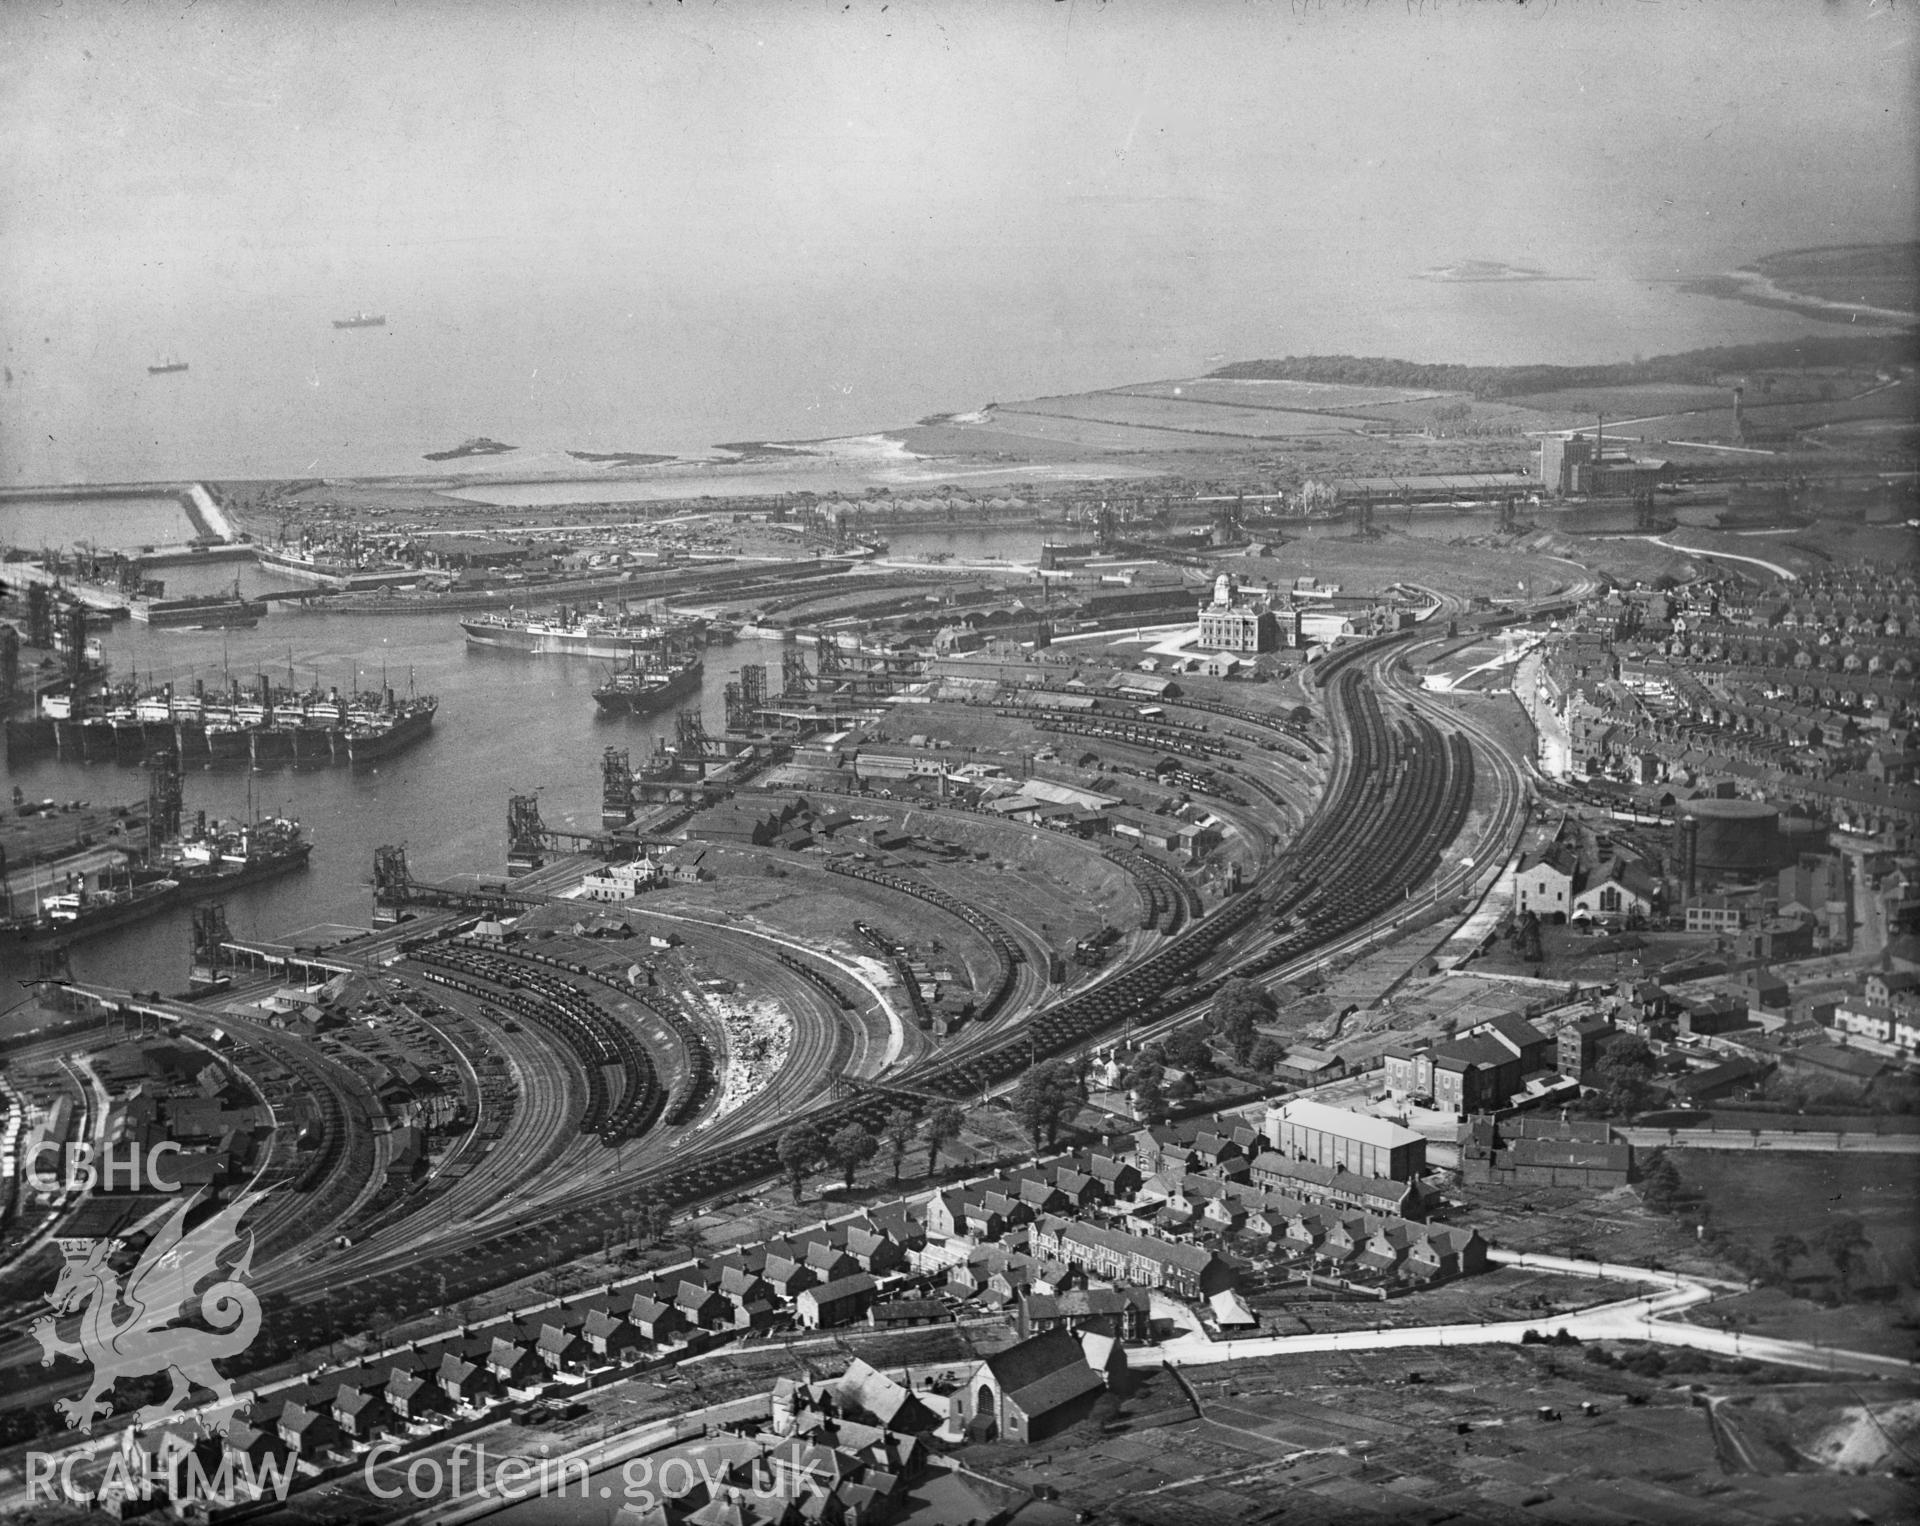 General view of Barry showing docks, oblique aerial view. 5?x4? black and white glass plate negative.